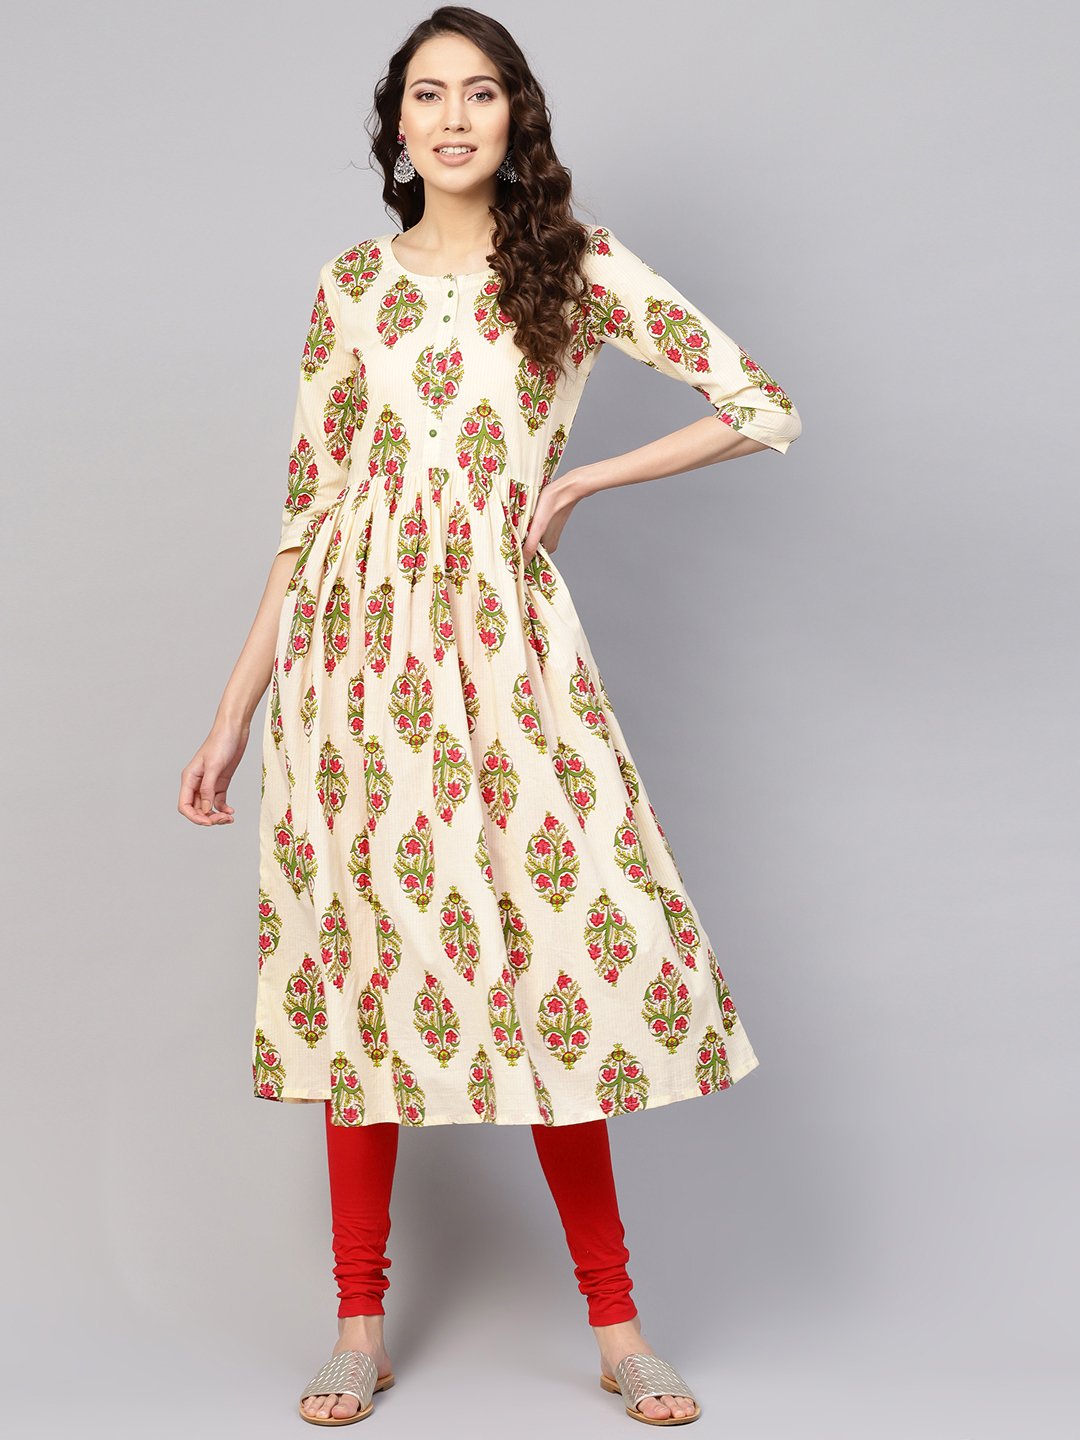 Women's Off-White & Green Printed Midi Fit And Flare Dress - Nayo Clothing